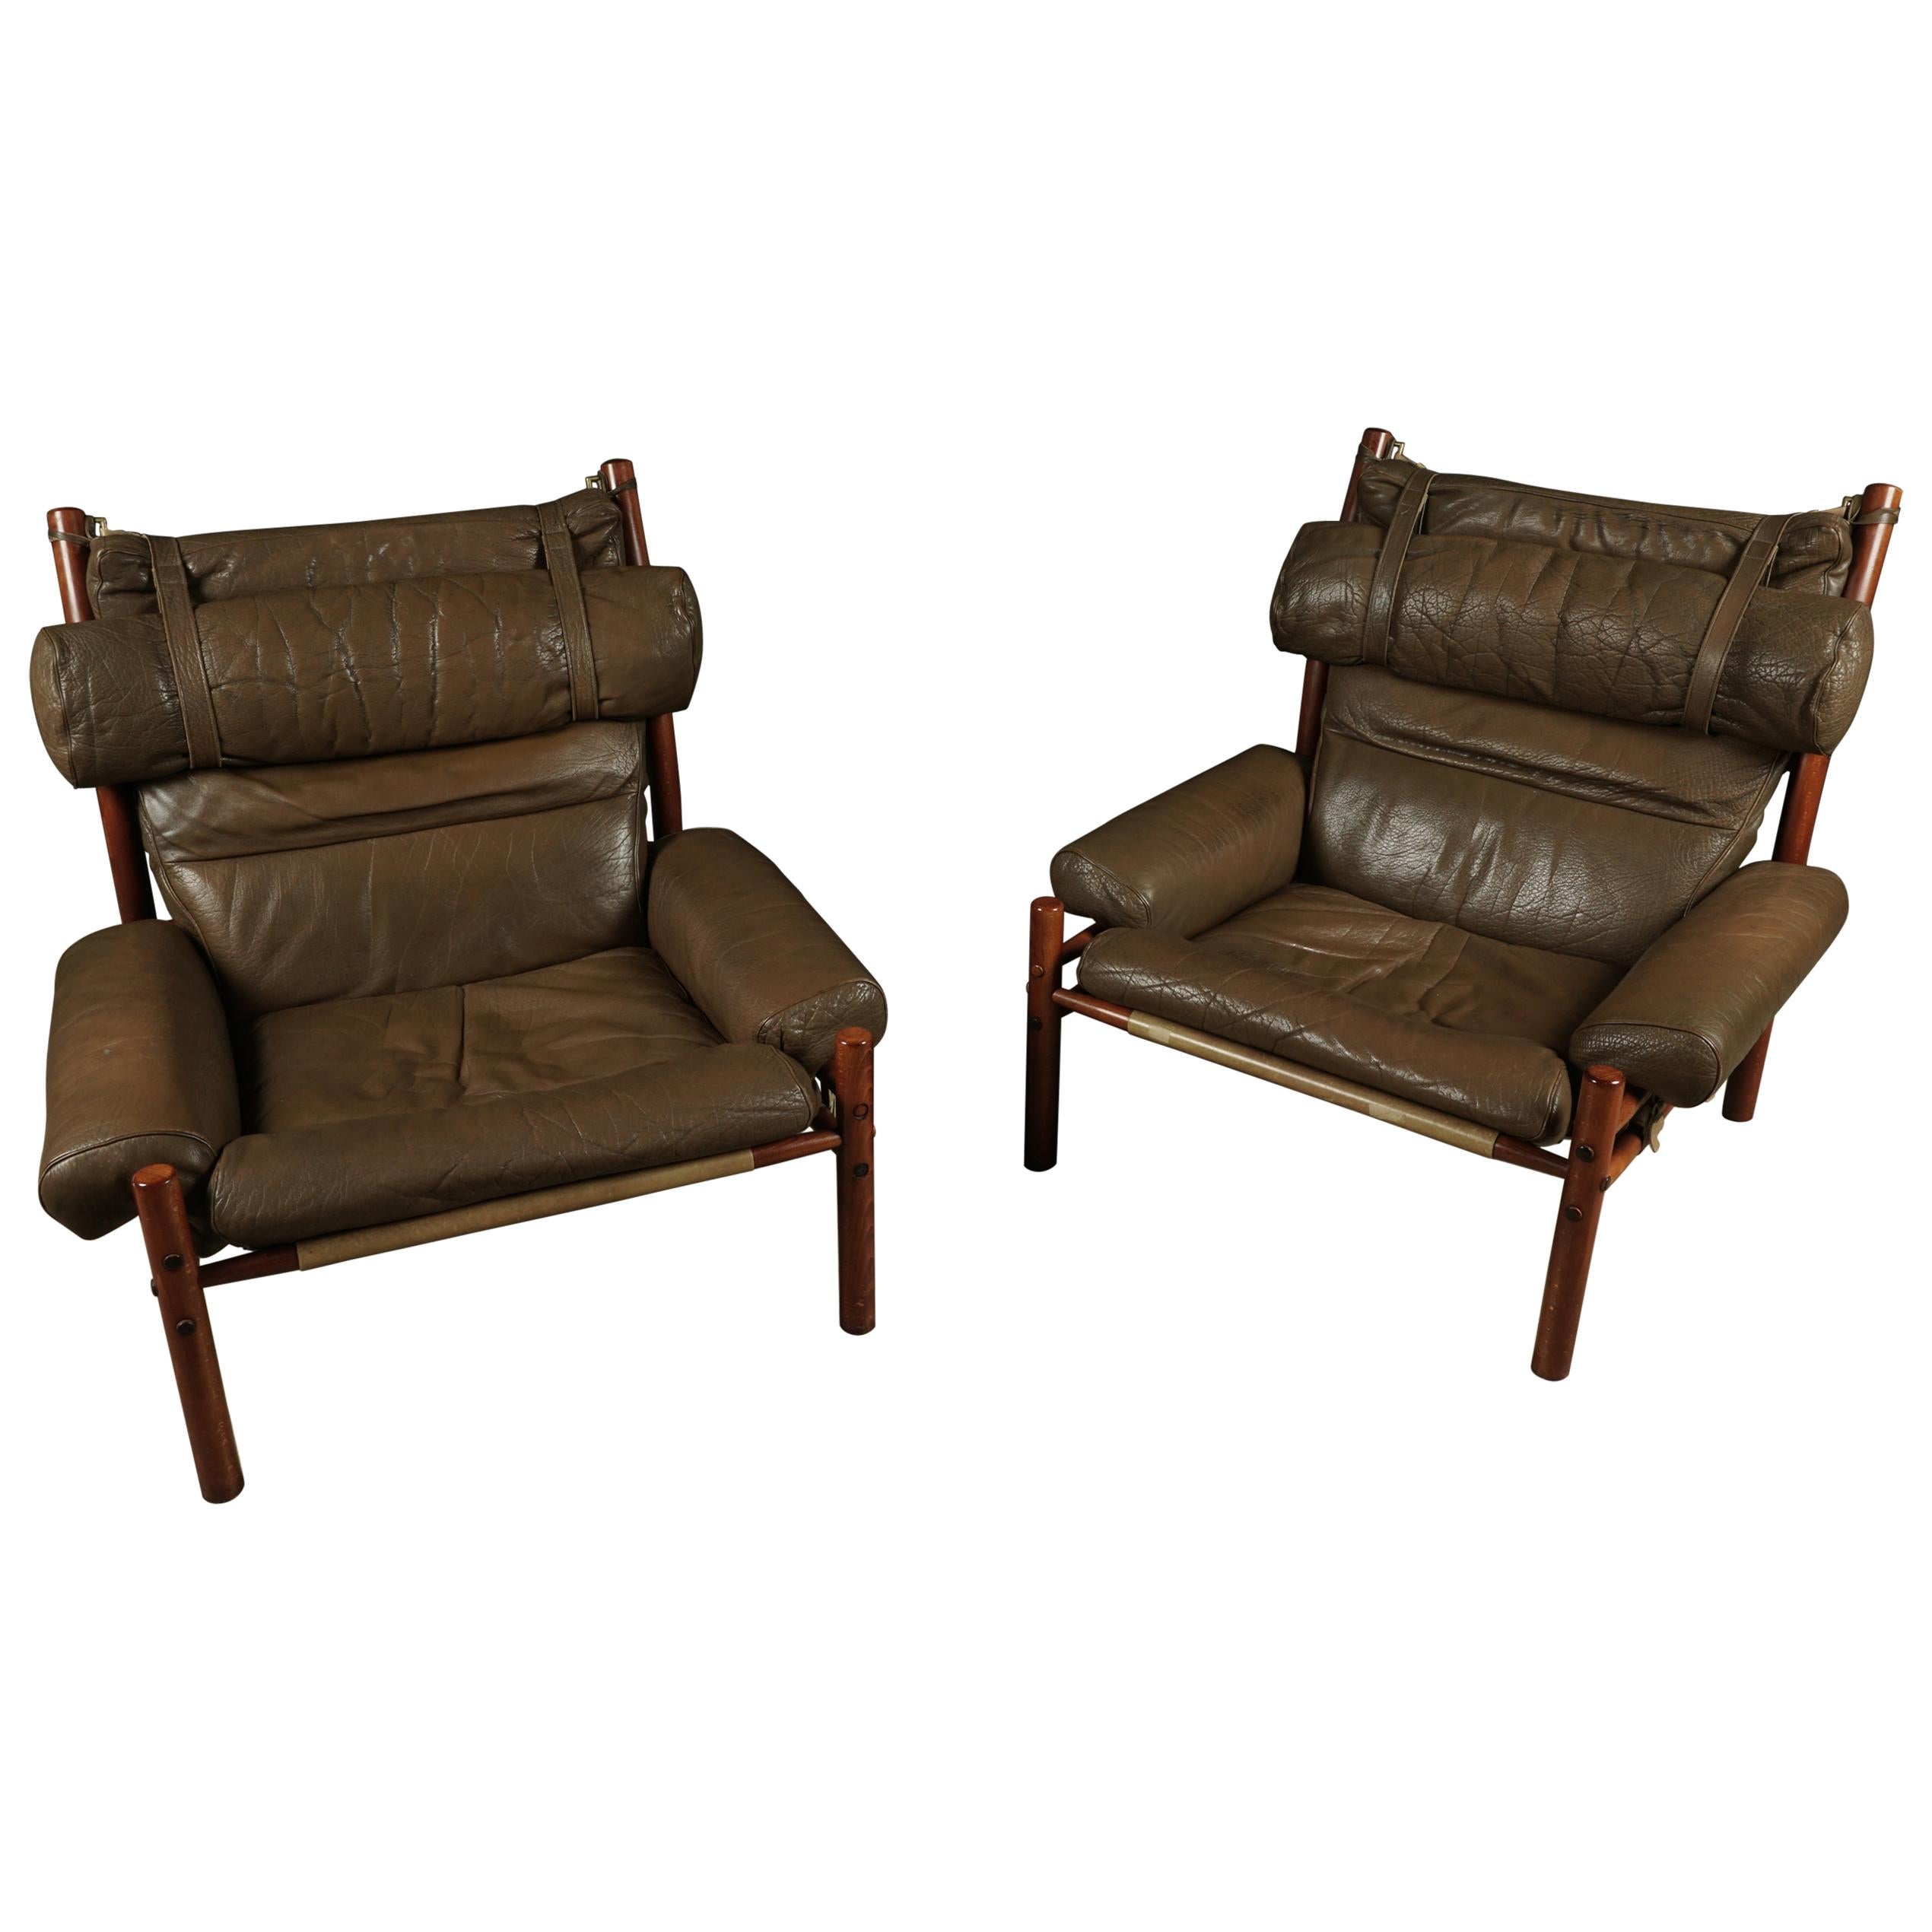 Pair of Arne Norell Lounge Chairs, Model Inca, circa 1960